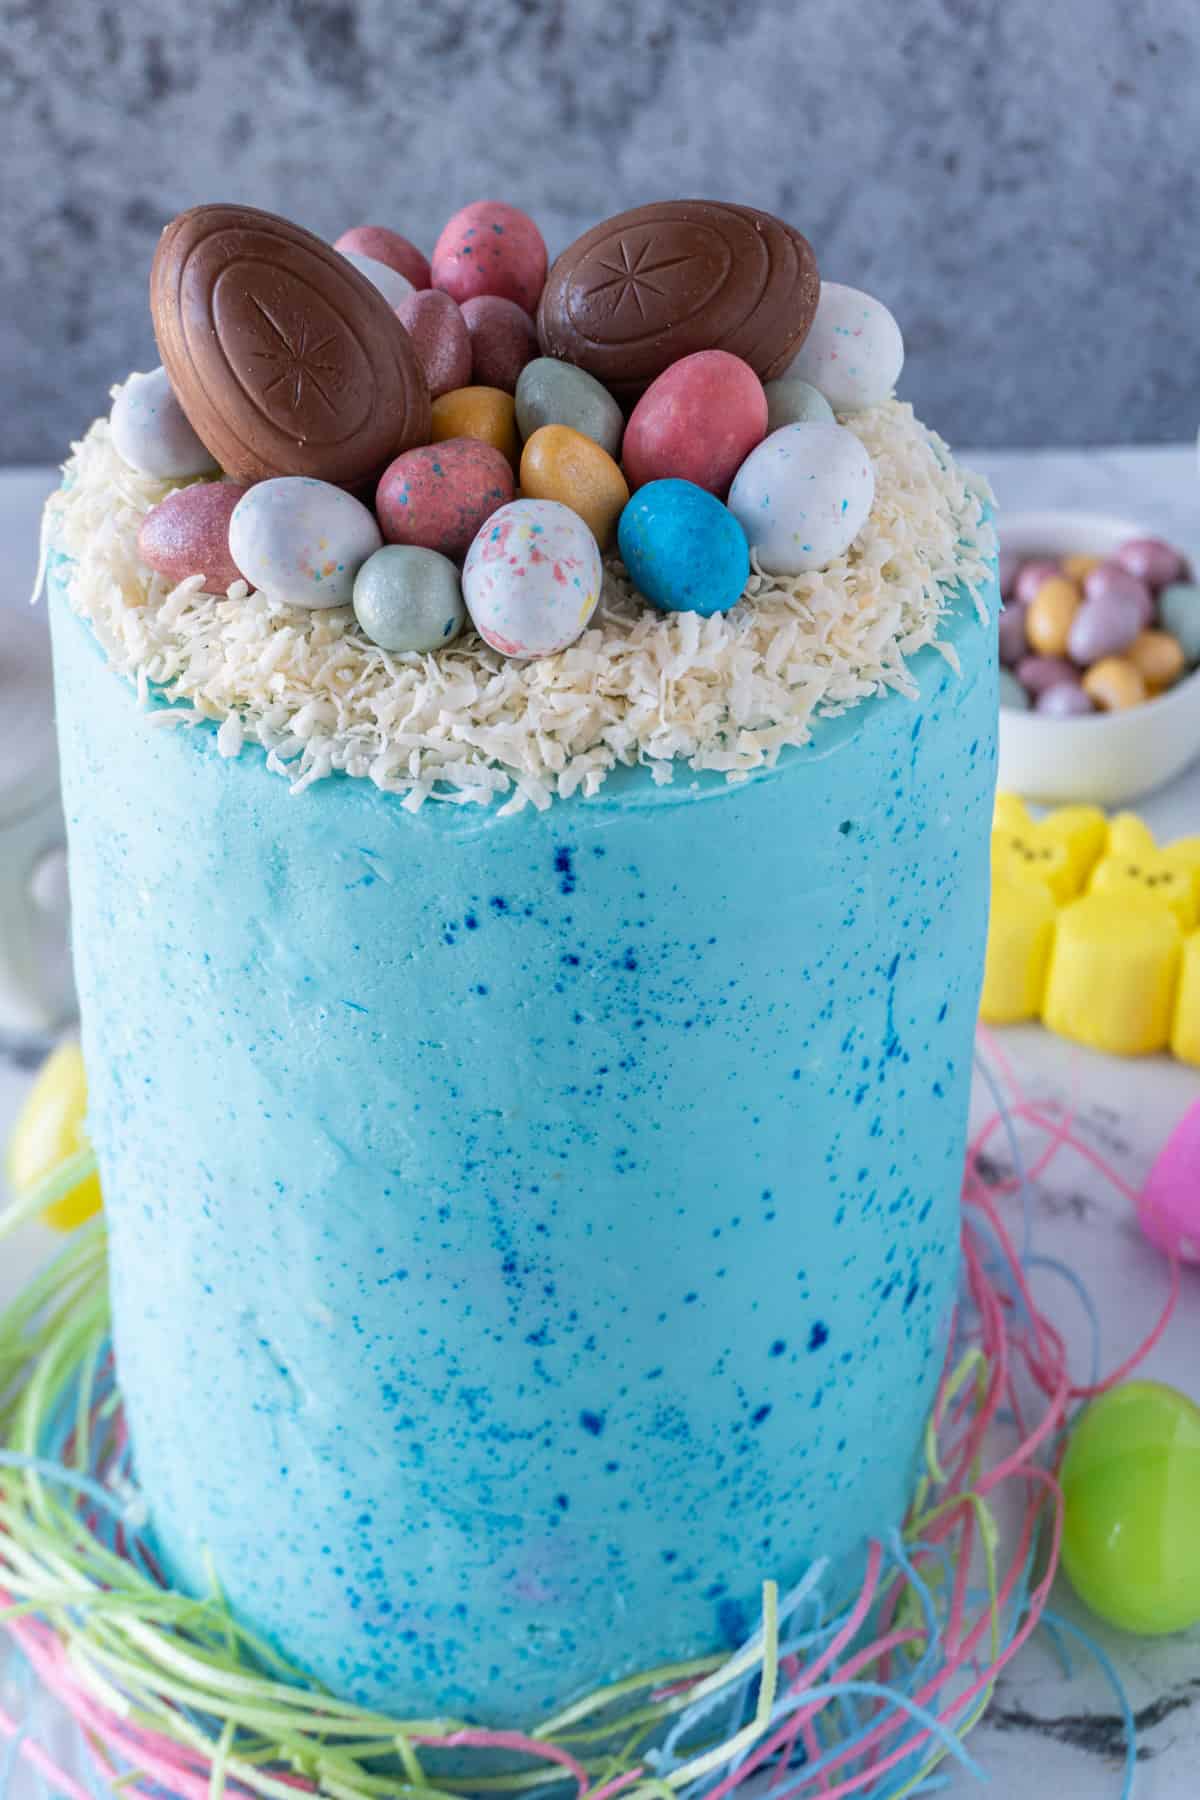 Easter Cake with speckled blue frosting, coconut nest on top, and Easter egg candies